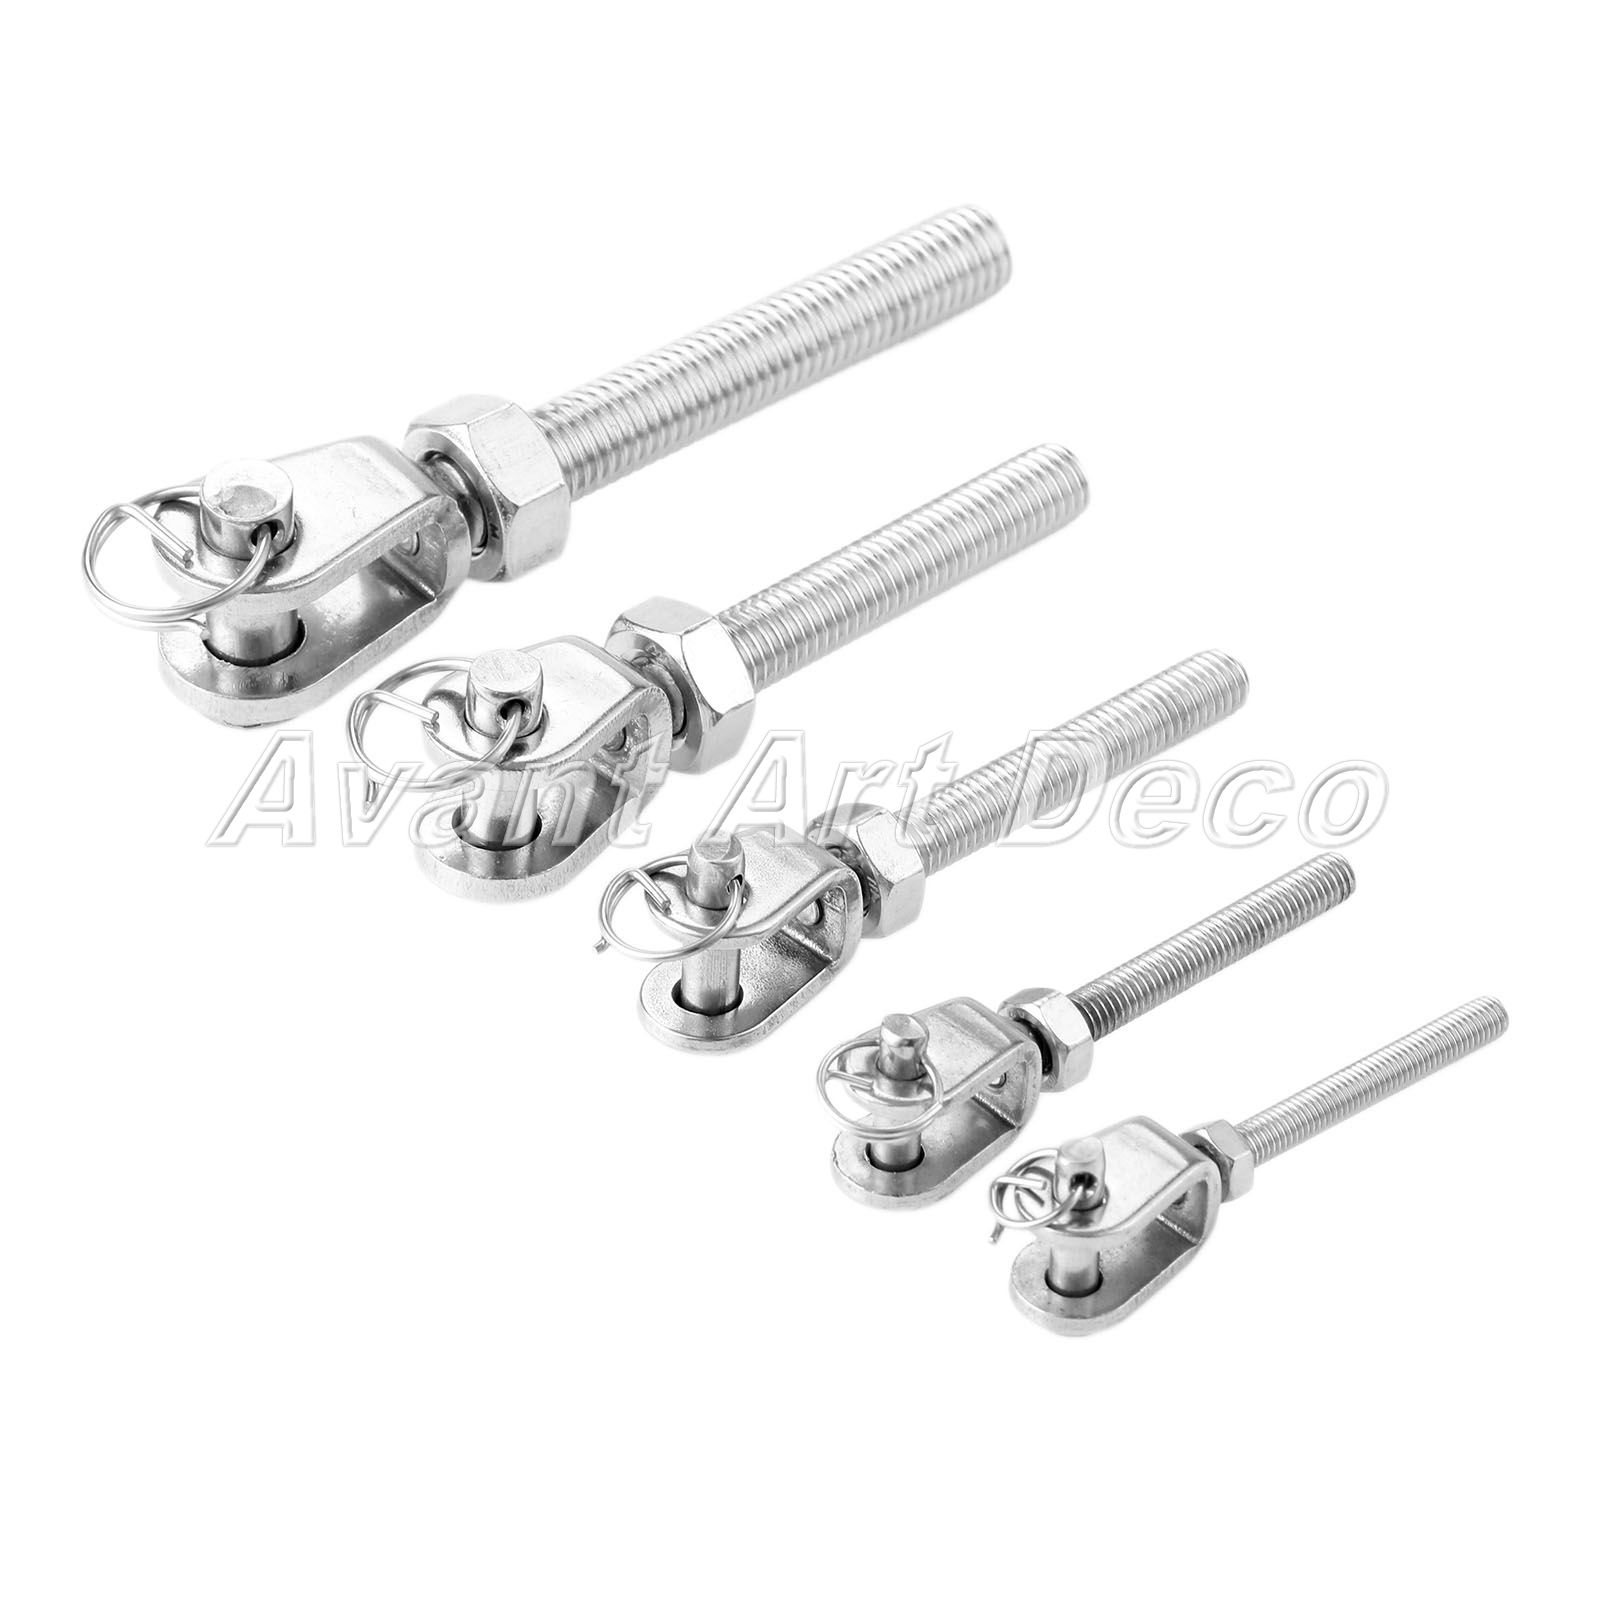 1x Replacement Stainless Steel Jaw Open Bolt Nut Turnbuckle Rigging Screw Bolt 